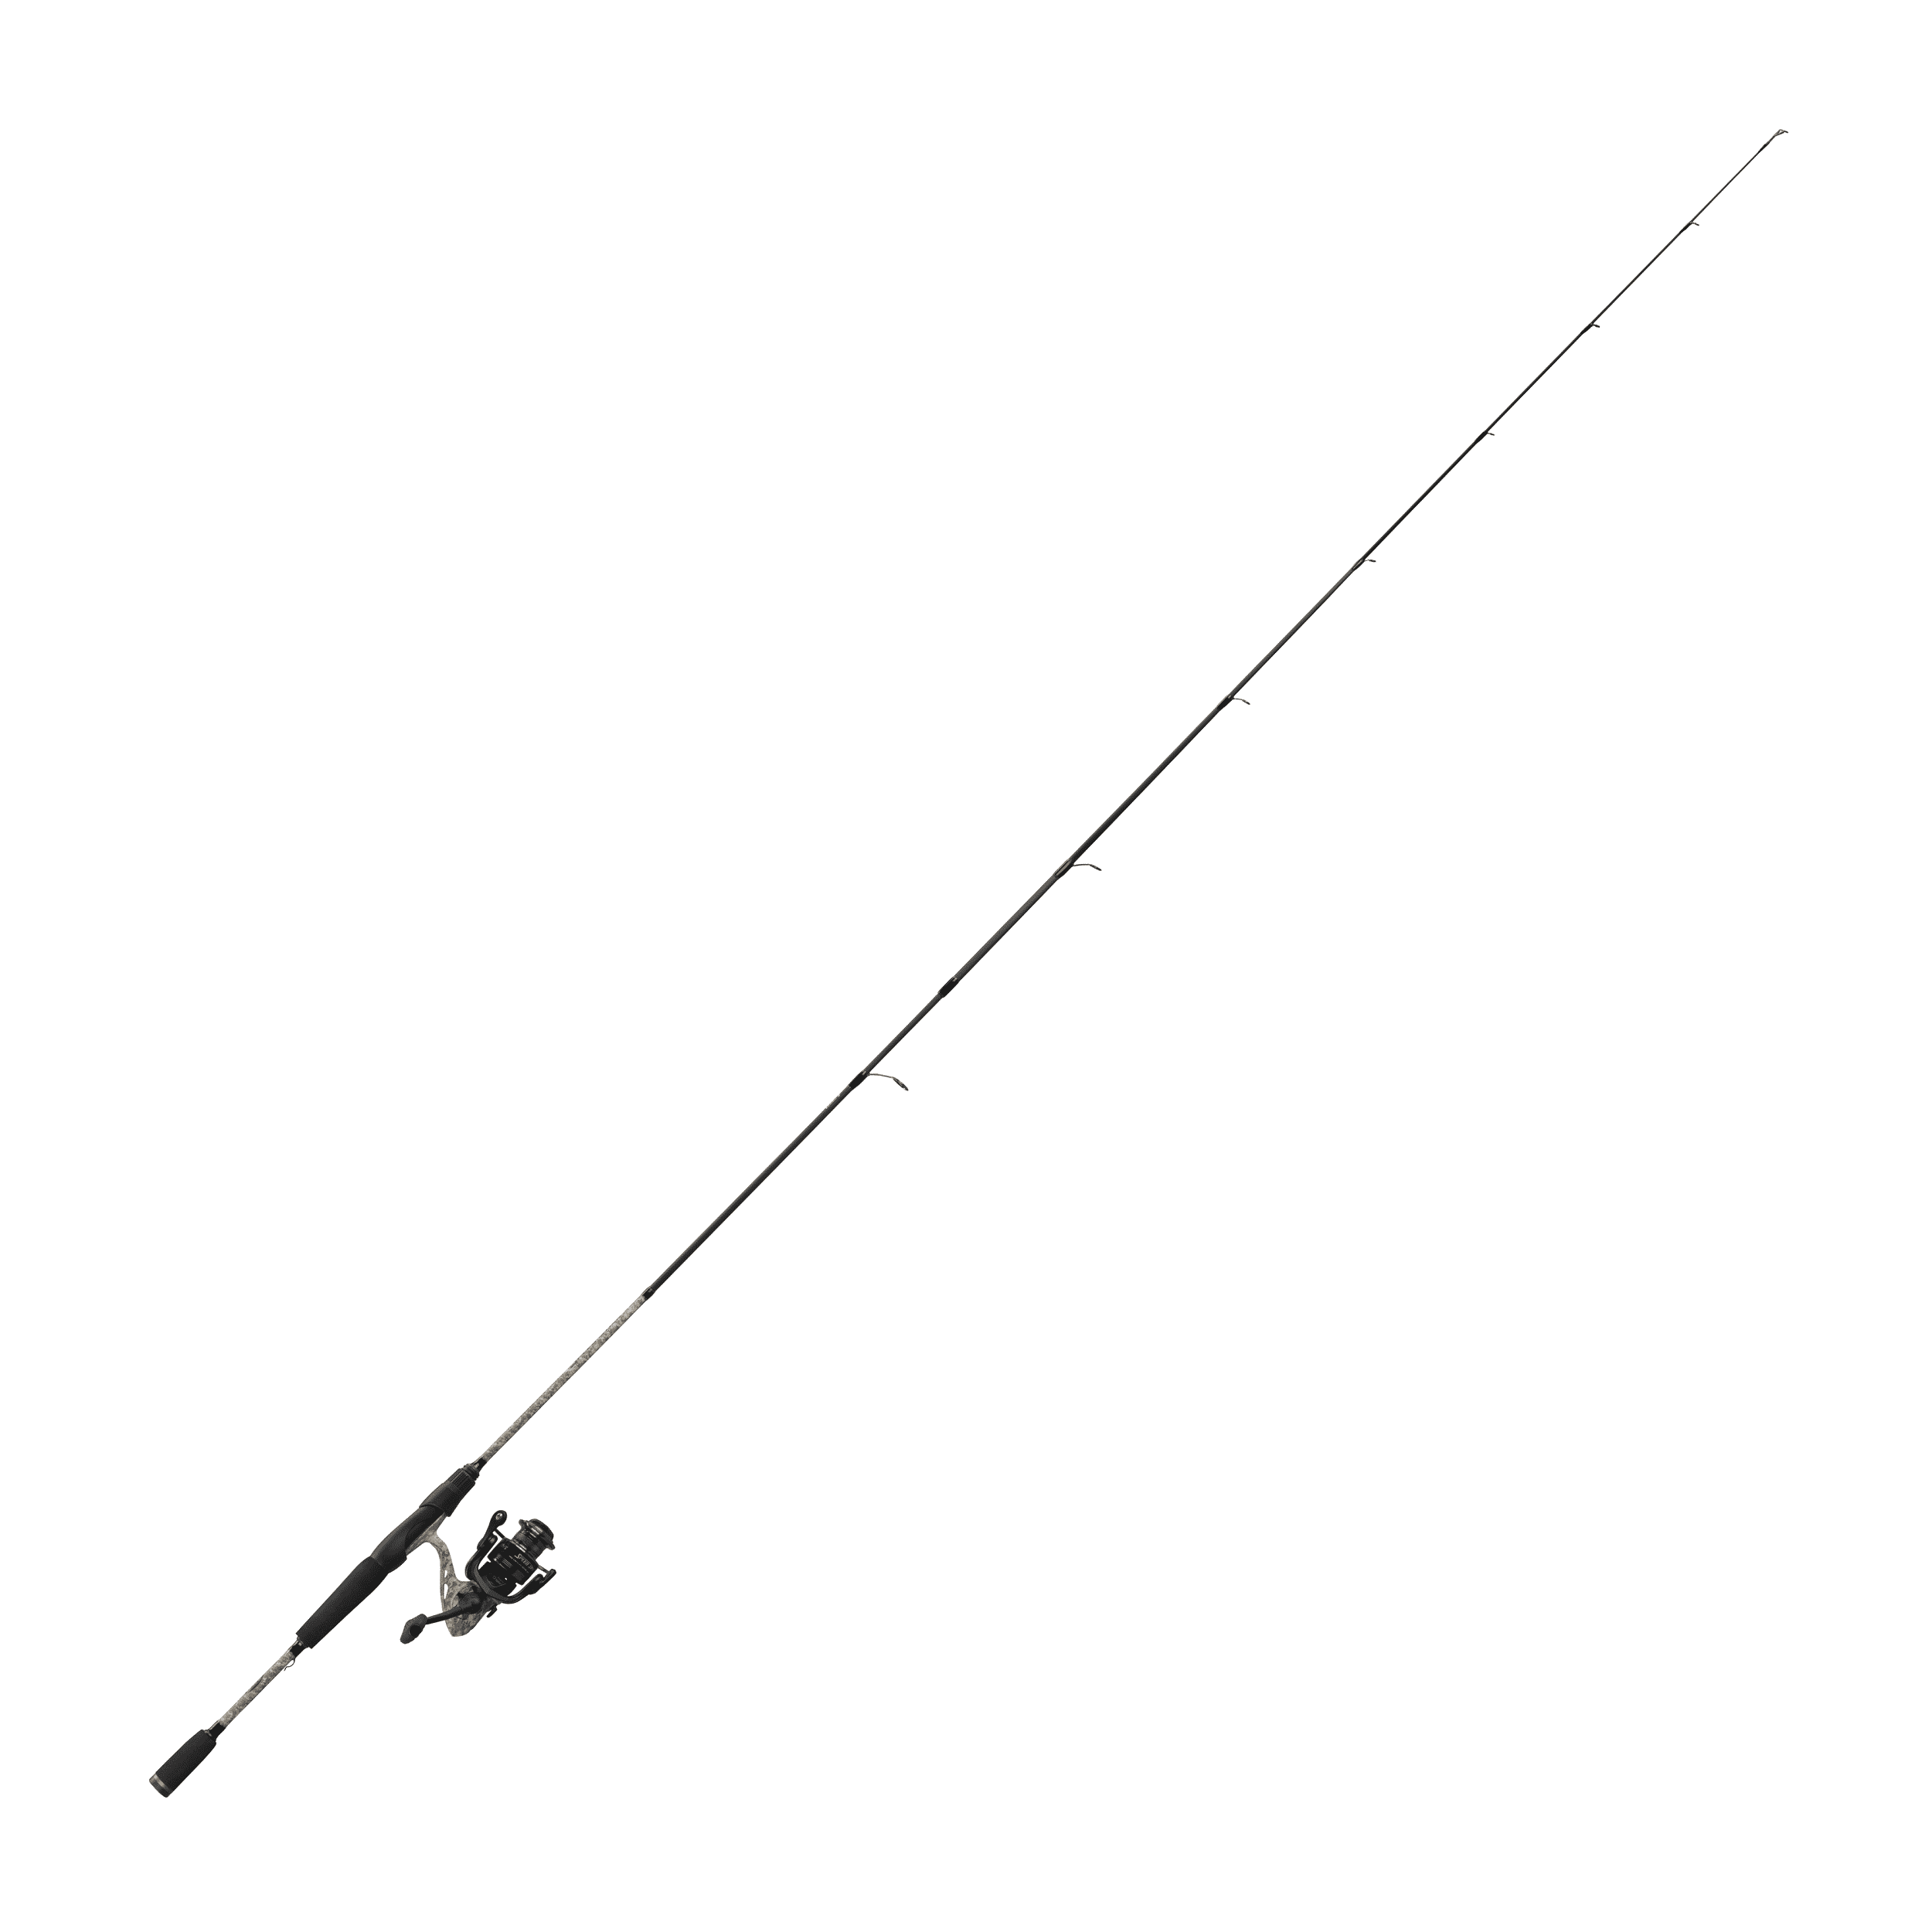 Lew's American Hero Camo 400 6.2:1 7'-2pc Med Spinning Combo IM7 